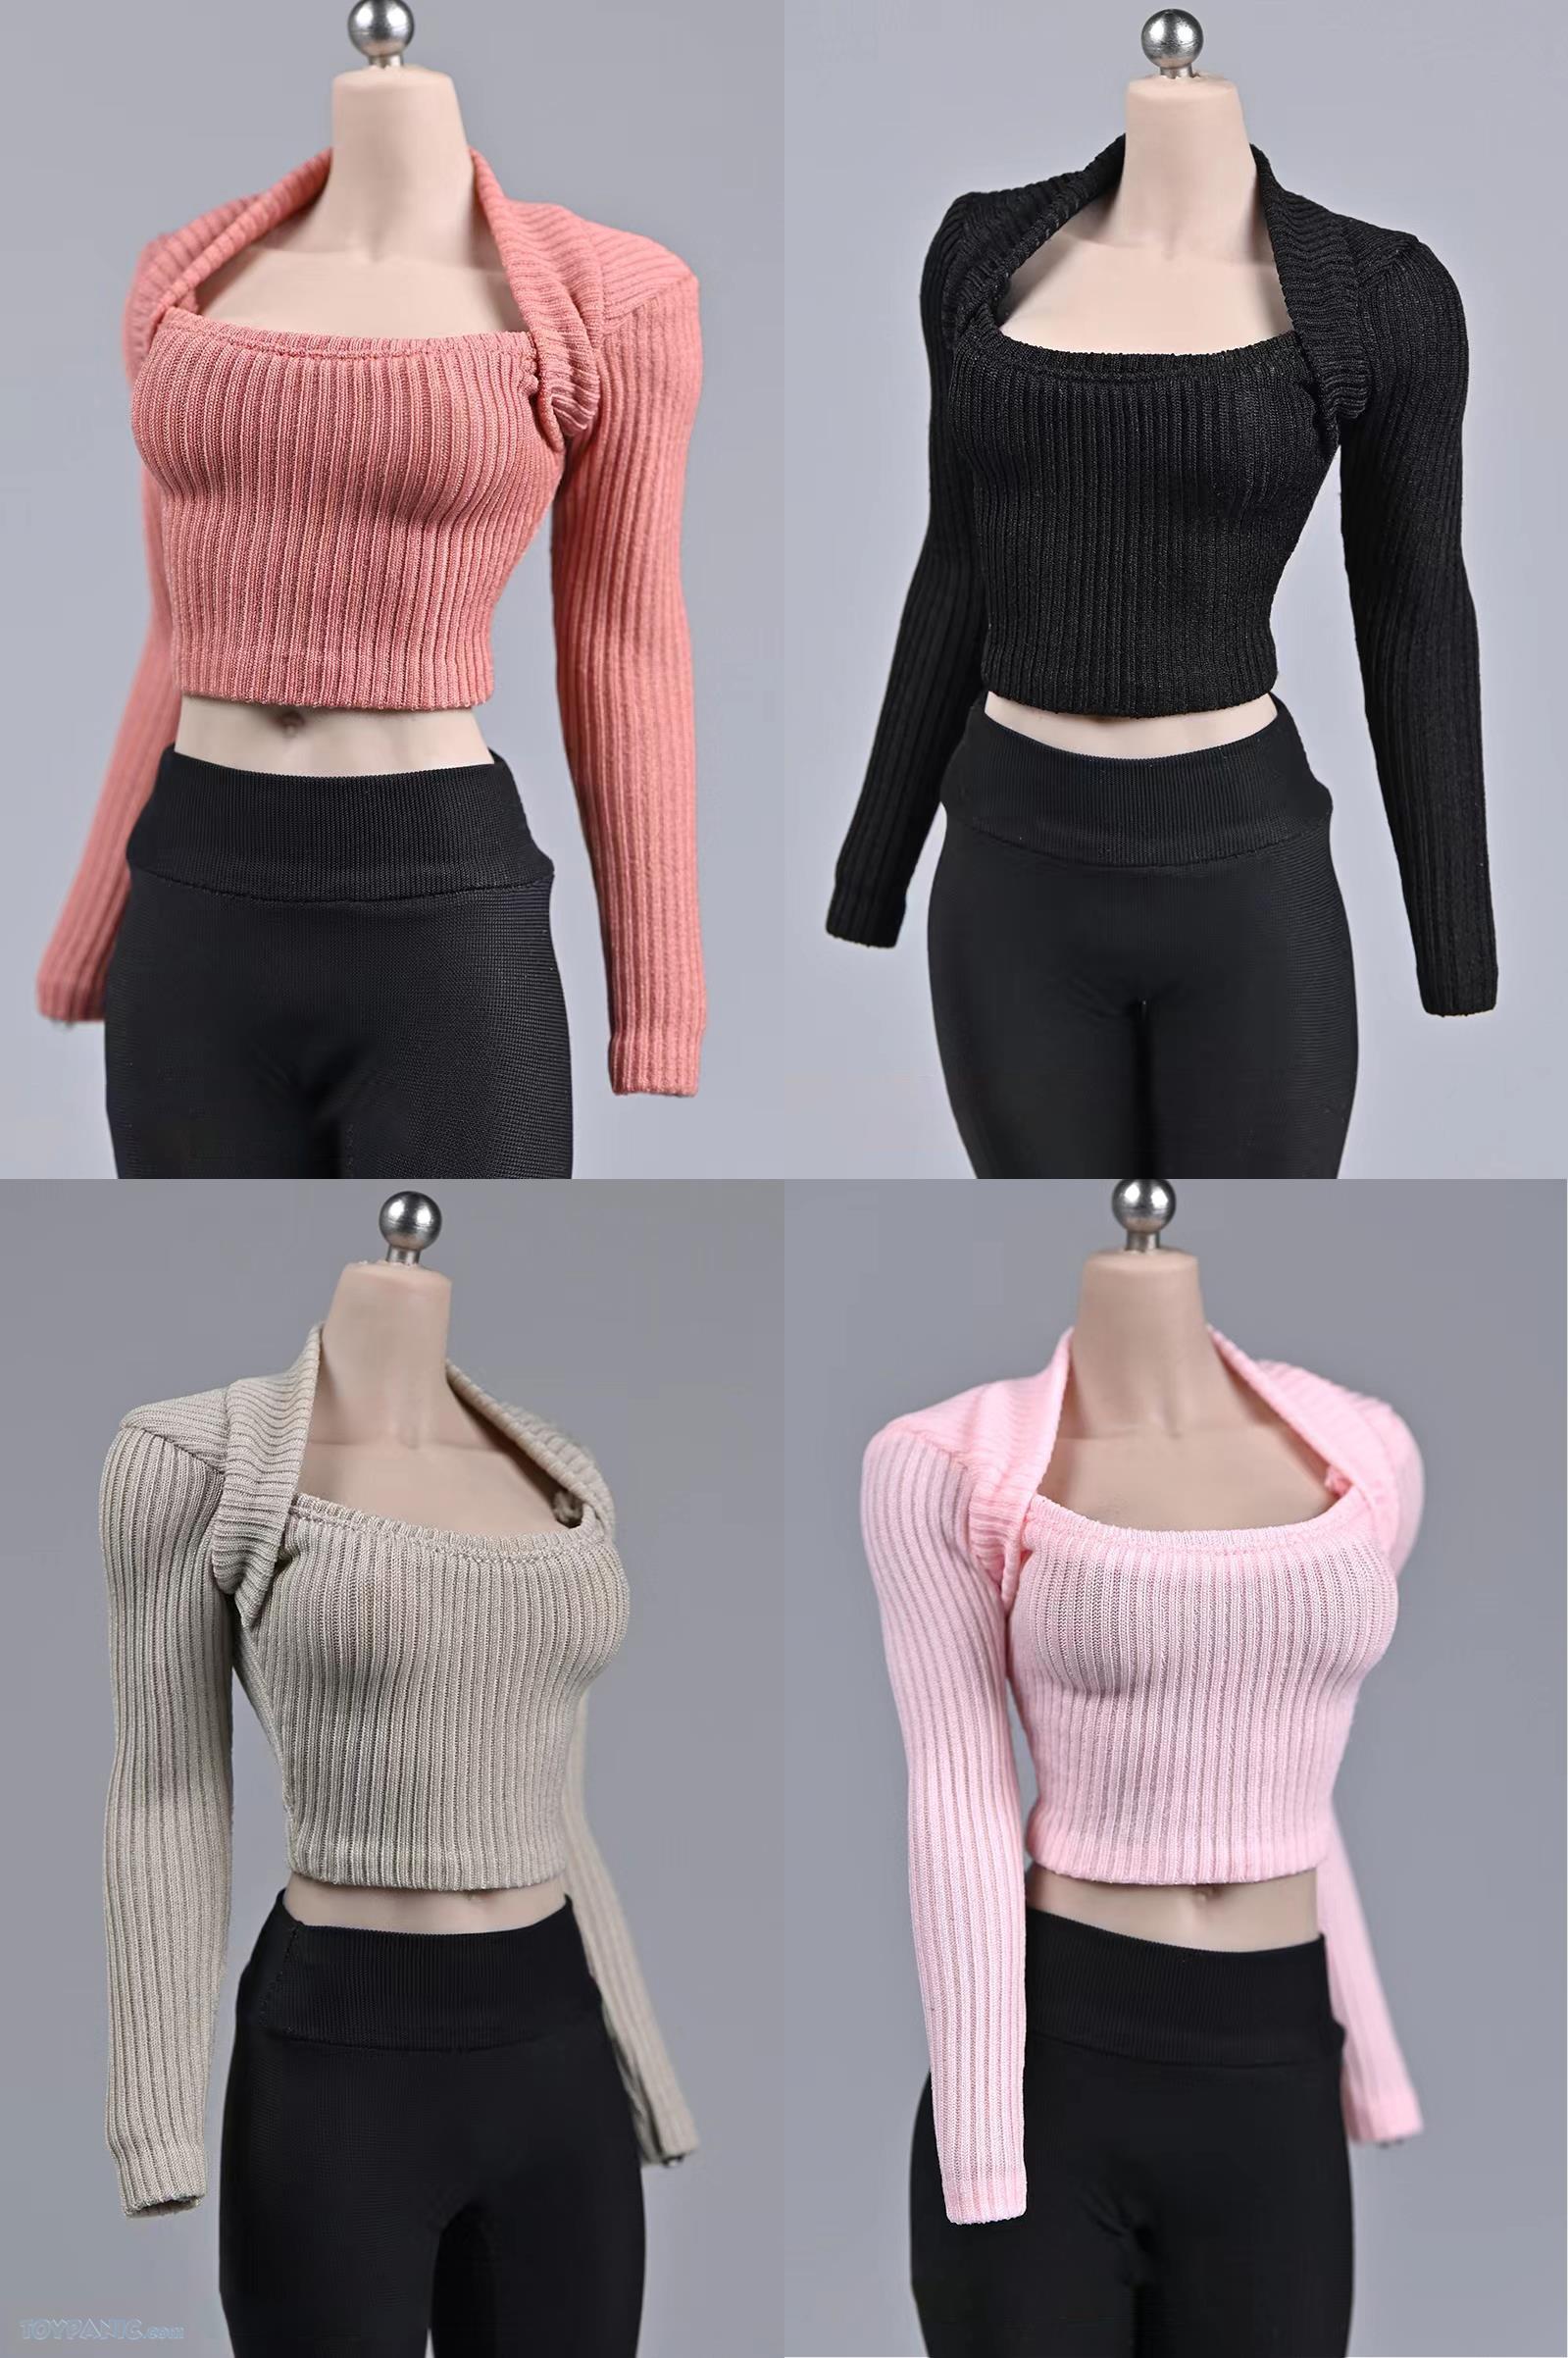 NEW PRODUCT: 1/6 Woman Trendy Wide Neck Sweater Cross Style W001A and W001B (Sets of 8 and 4) from DS  412202213648AM_1873563